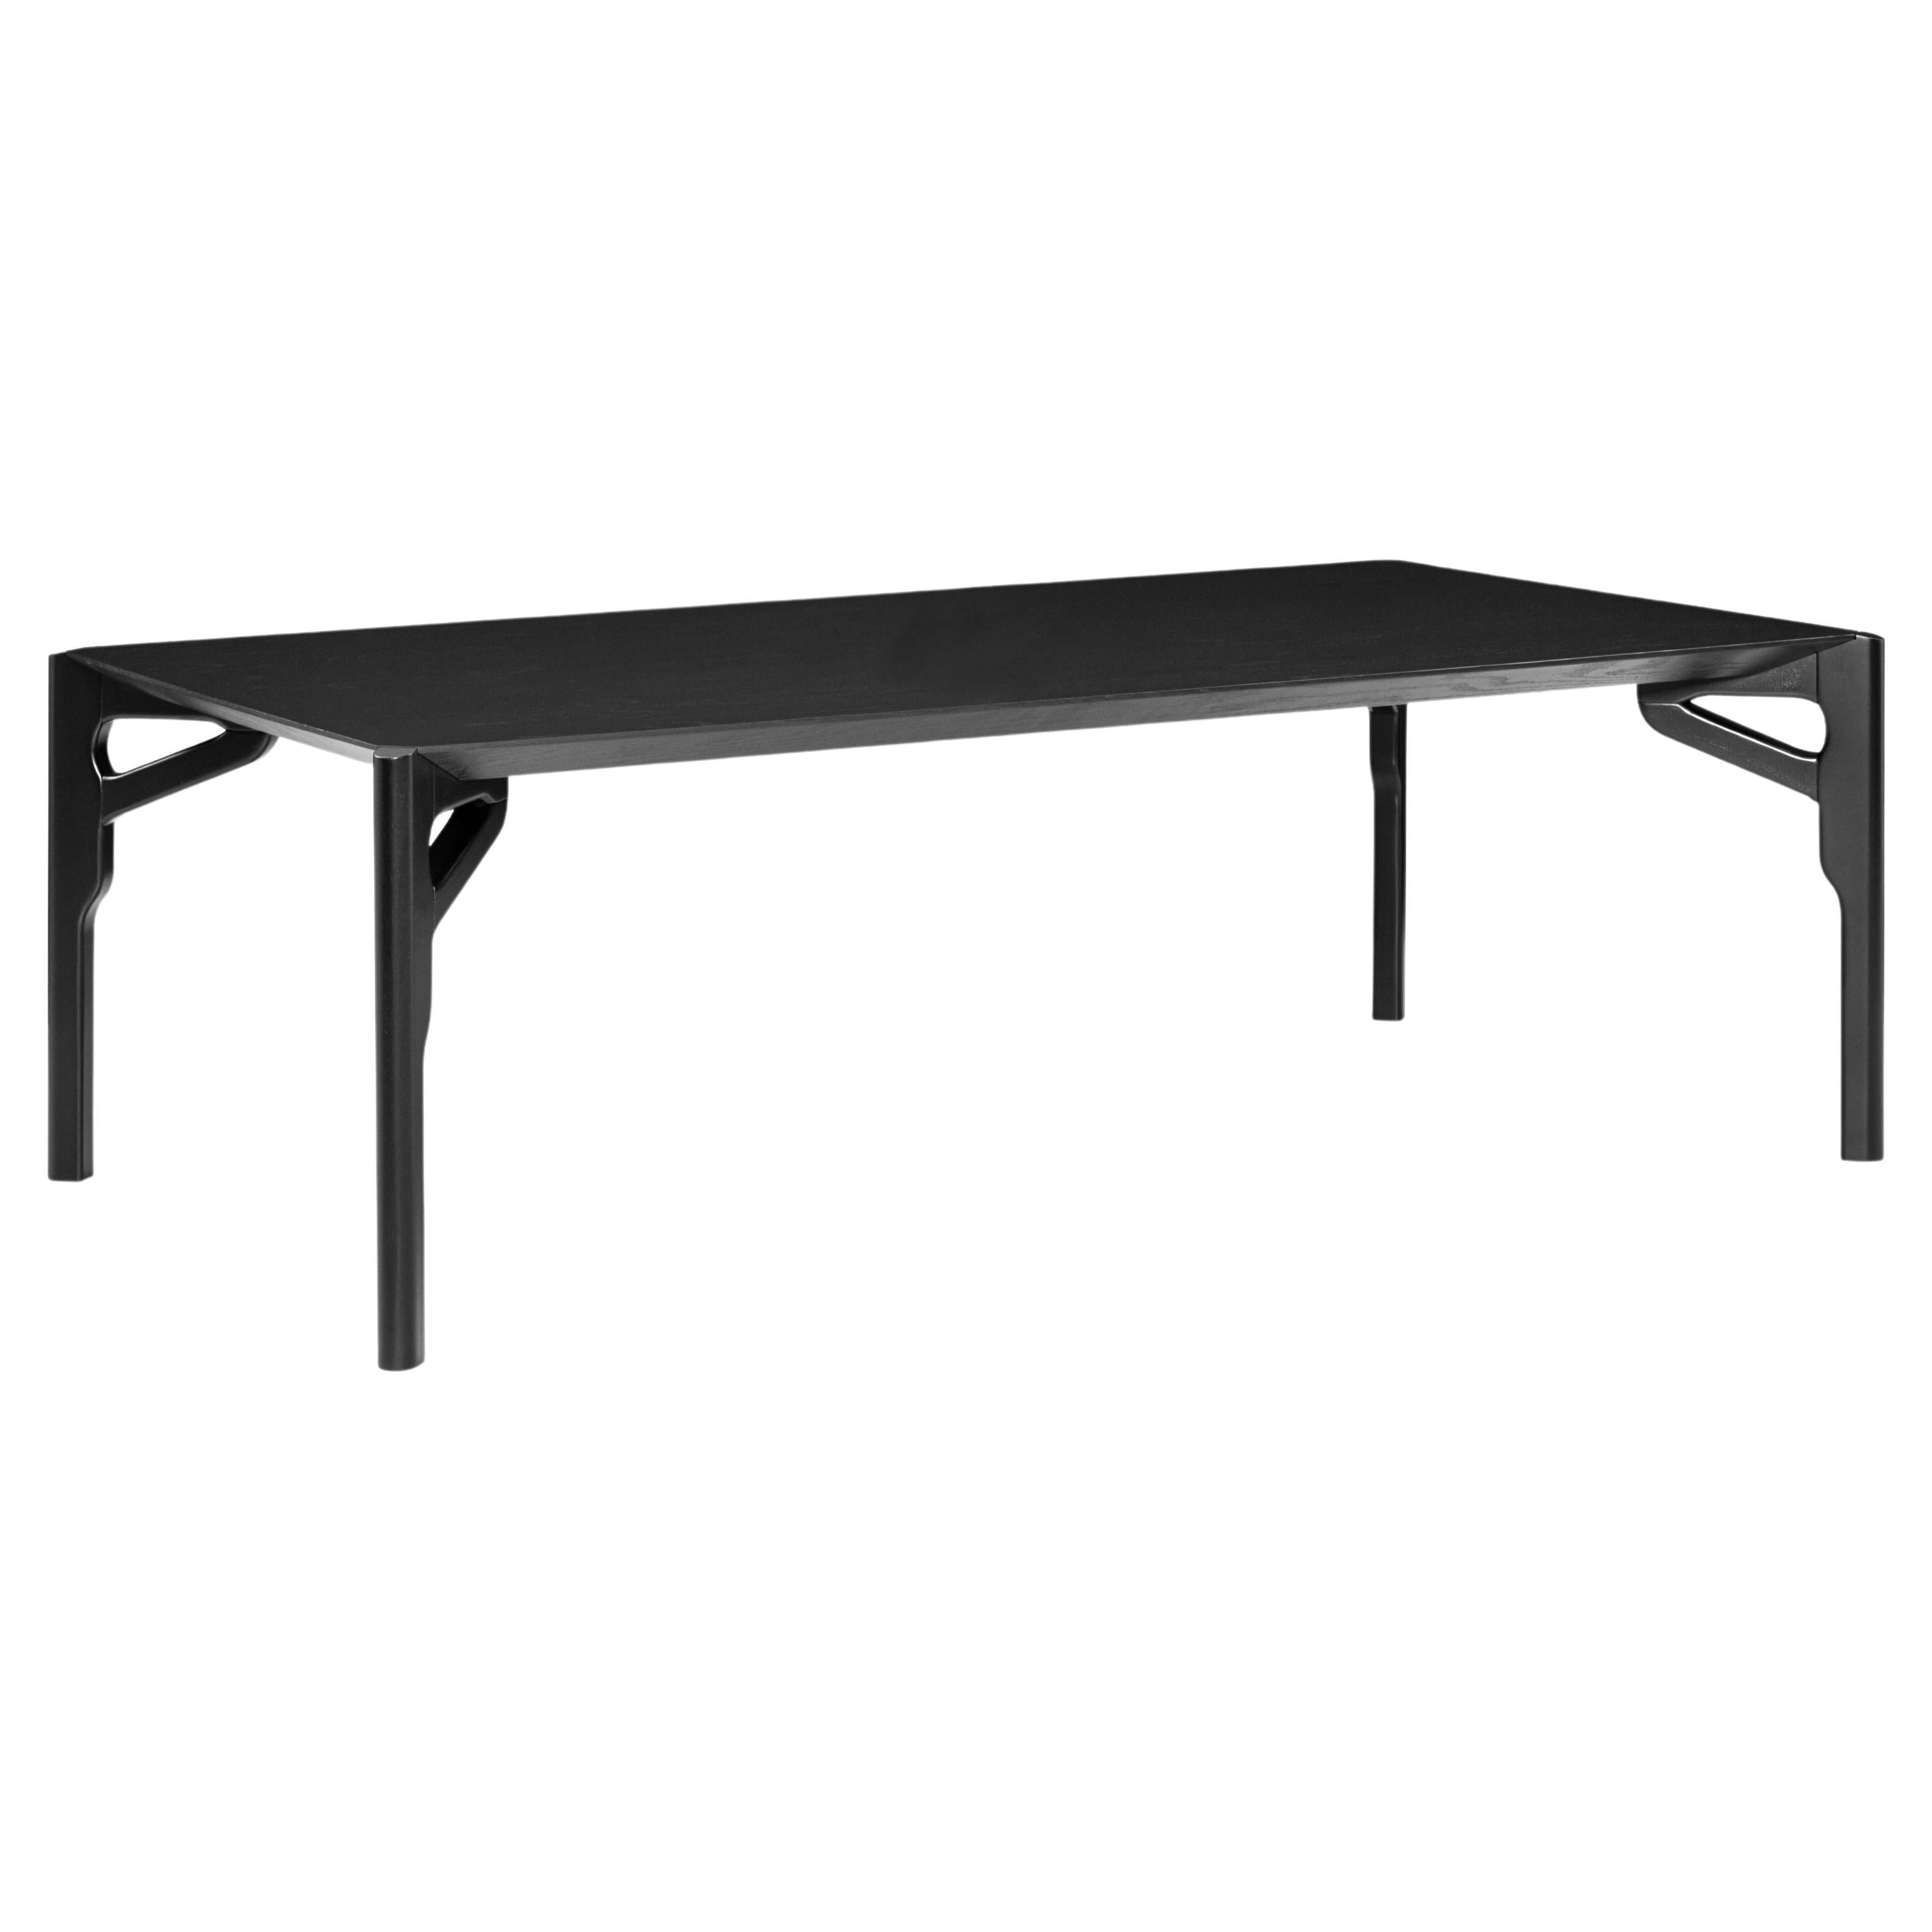 Hawk Dining Table with a Black Oak Wood Finish Table Top 86''